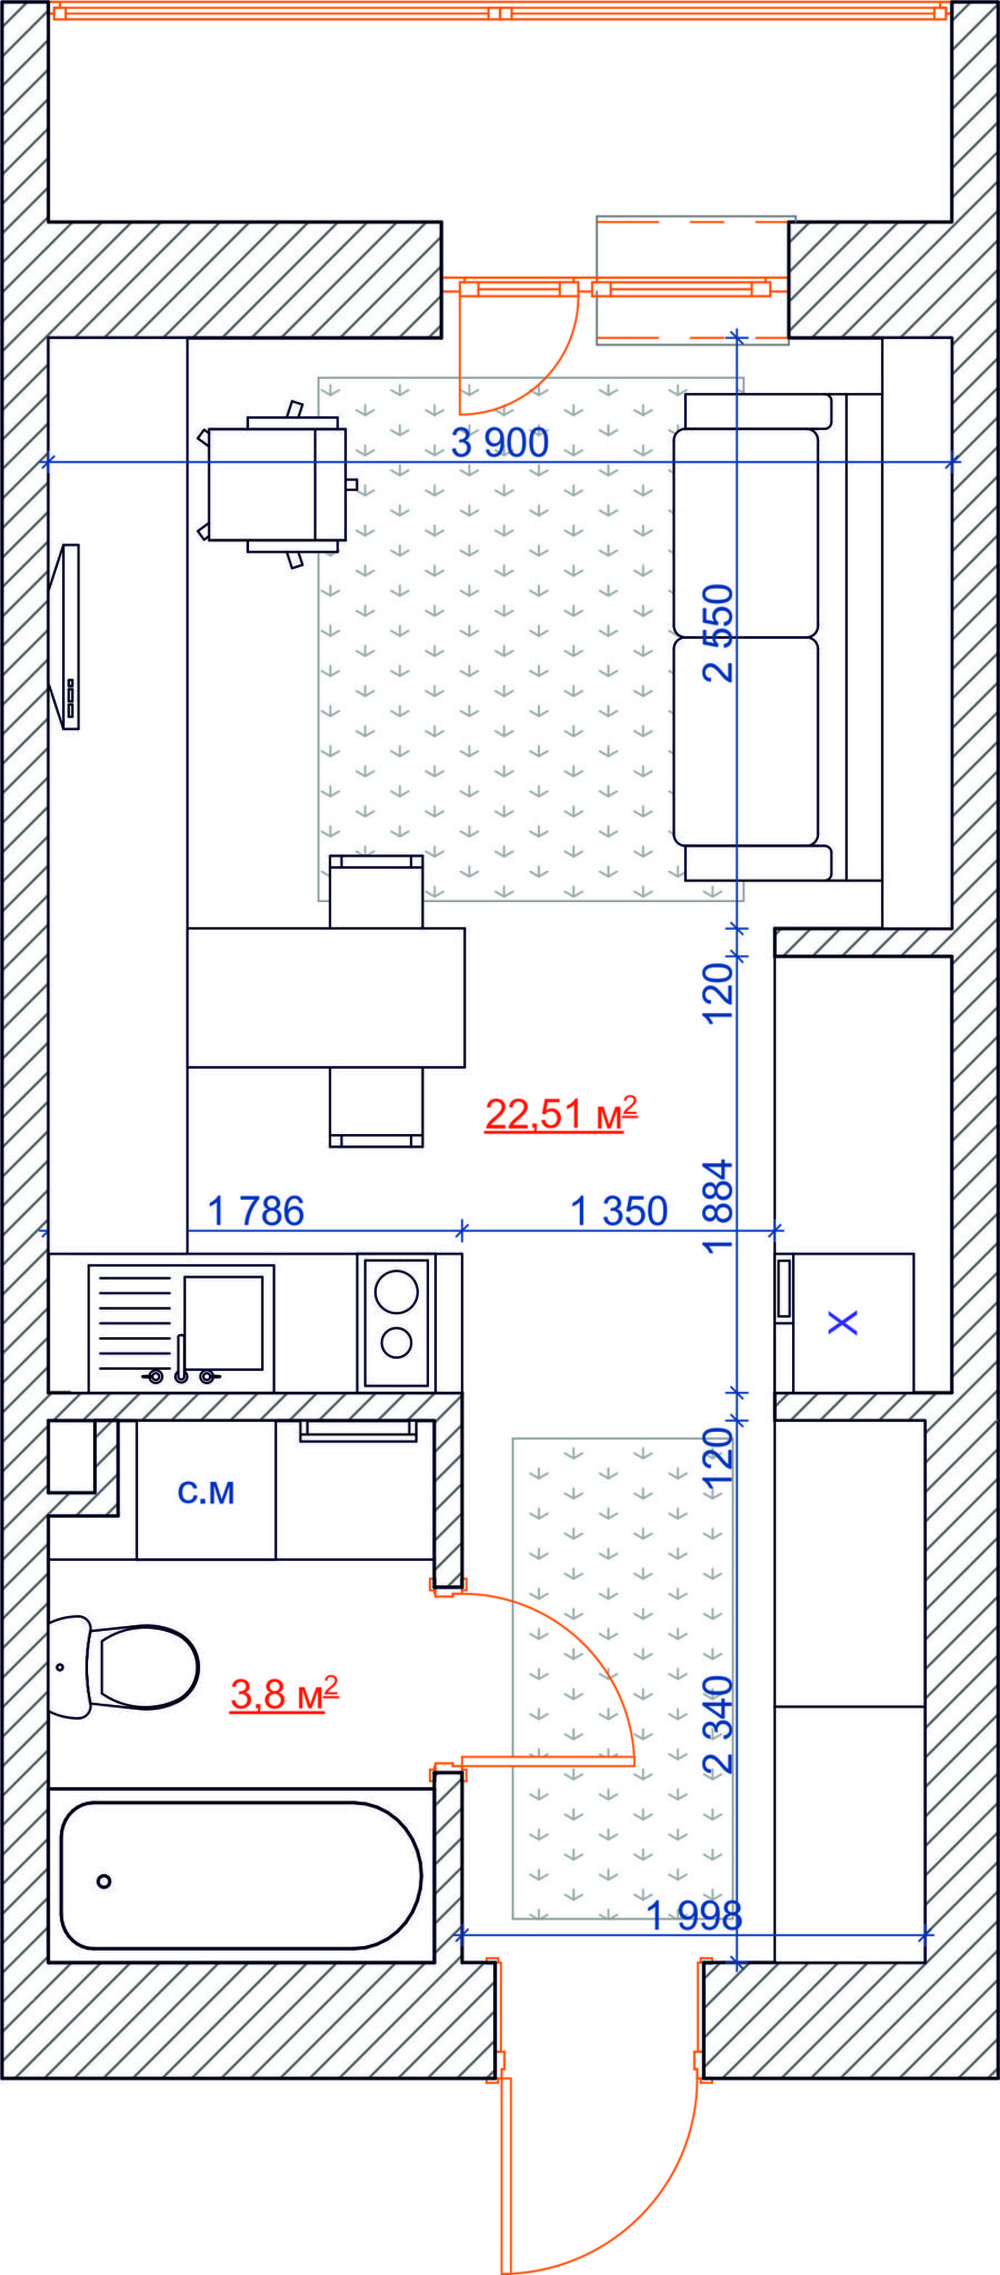 4 Inspiring Home Designs Under 300 Square Feet (With Floor Plans)